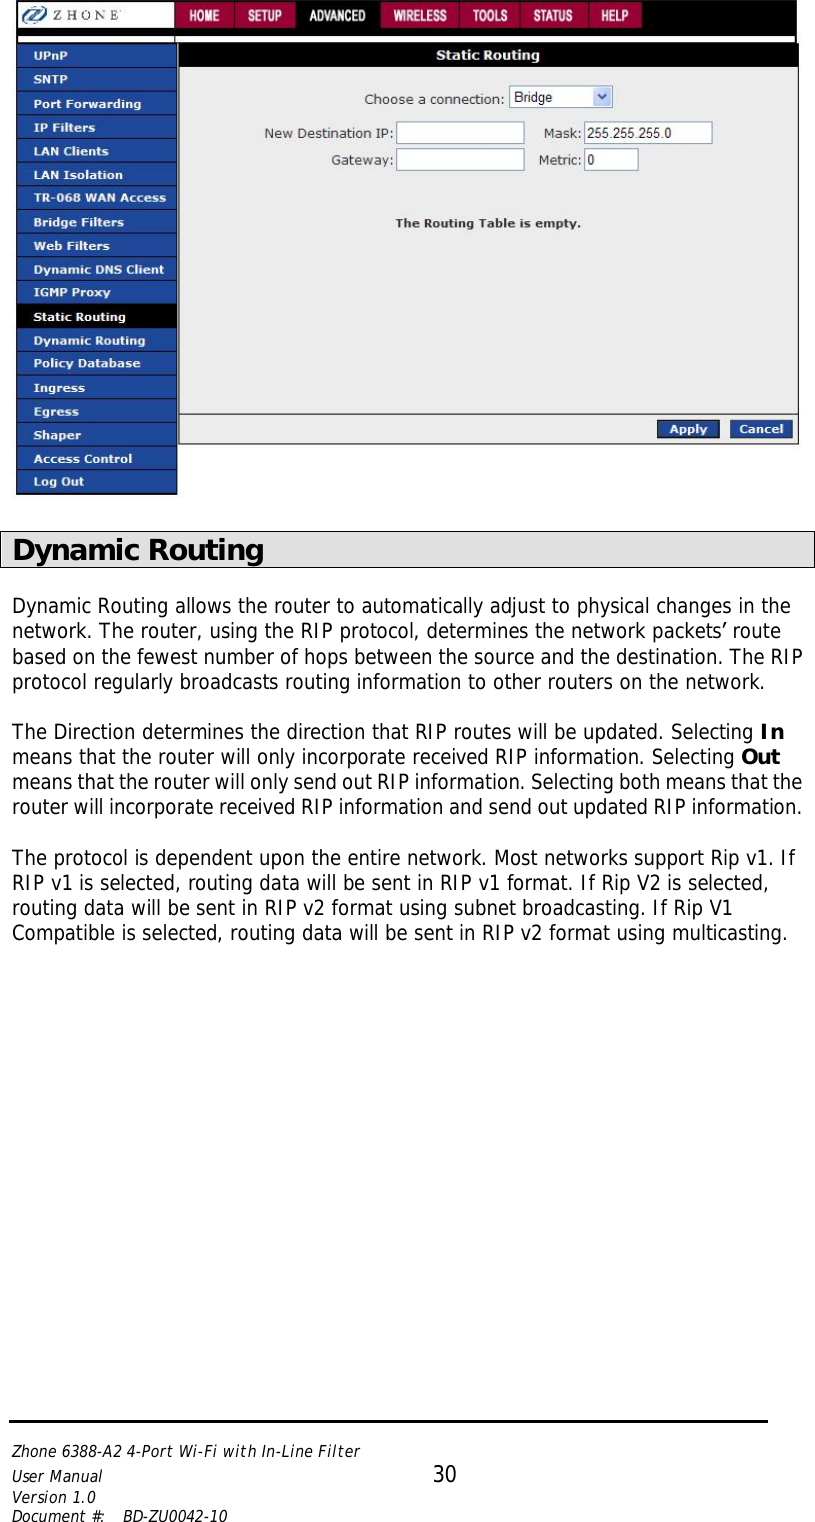   Zhone 6388-A2 4-Port Wi-Fi with In-Line Filter User Manual 30 Version 1.0 Document #:  BD-ZU0042-10     Dynamic Routing  Dynamic Routing allows the router to automatically adjust to physical changes in the network. The router, using the RIP protocol, determines the network packets’ route based on the fewest number of hops between the source and the destination. The RIP protocol regularly broadcasts routing information to other routers on the network.   The Direction determines the direction that RIP routes will be updated. Selecting In means that the router will only incorporate received RIP information. Selecting Out means that the router will only send out RIP information. Selecting both means that the router will incorporate received RIP information and send out updated RIP information.   The protocol is dependent upon the entire network. Most networks support Rip v1. If RIP v1 is selected, routing data will be sent in RIP v1 format. If Rip V2 is selected, routing data will be sent in RIP v2 format using subnet broadcasting. If Rip V1 Compatible is selected, routing data will be sent in RIP v2 format using multicasting.   